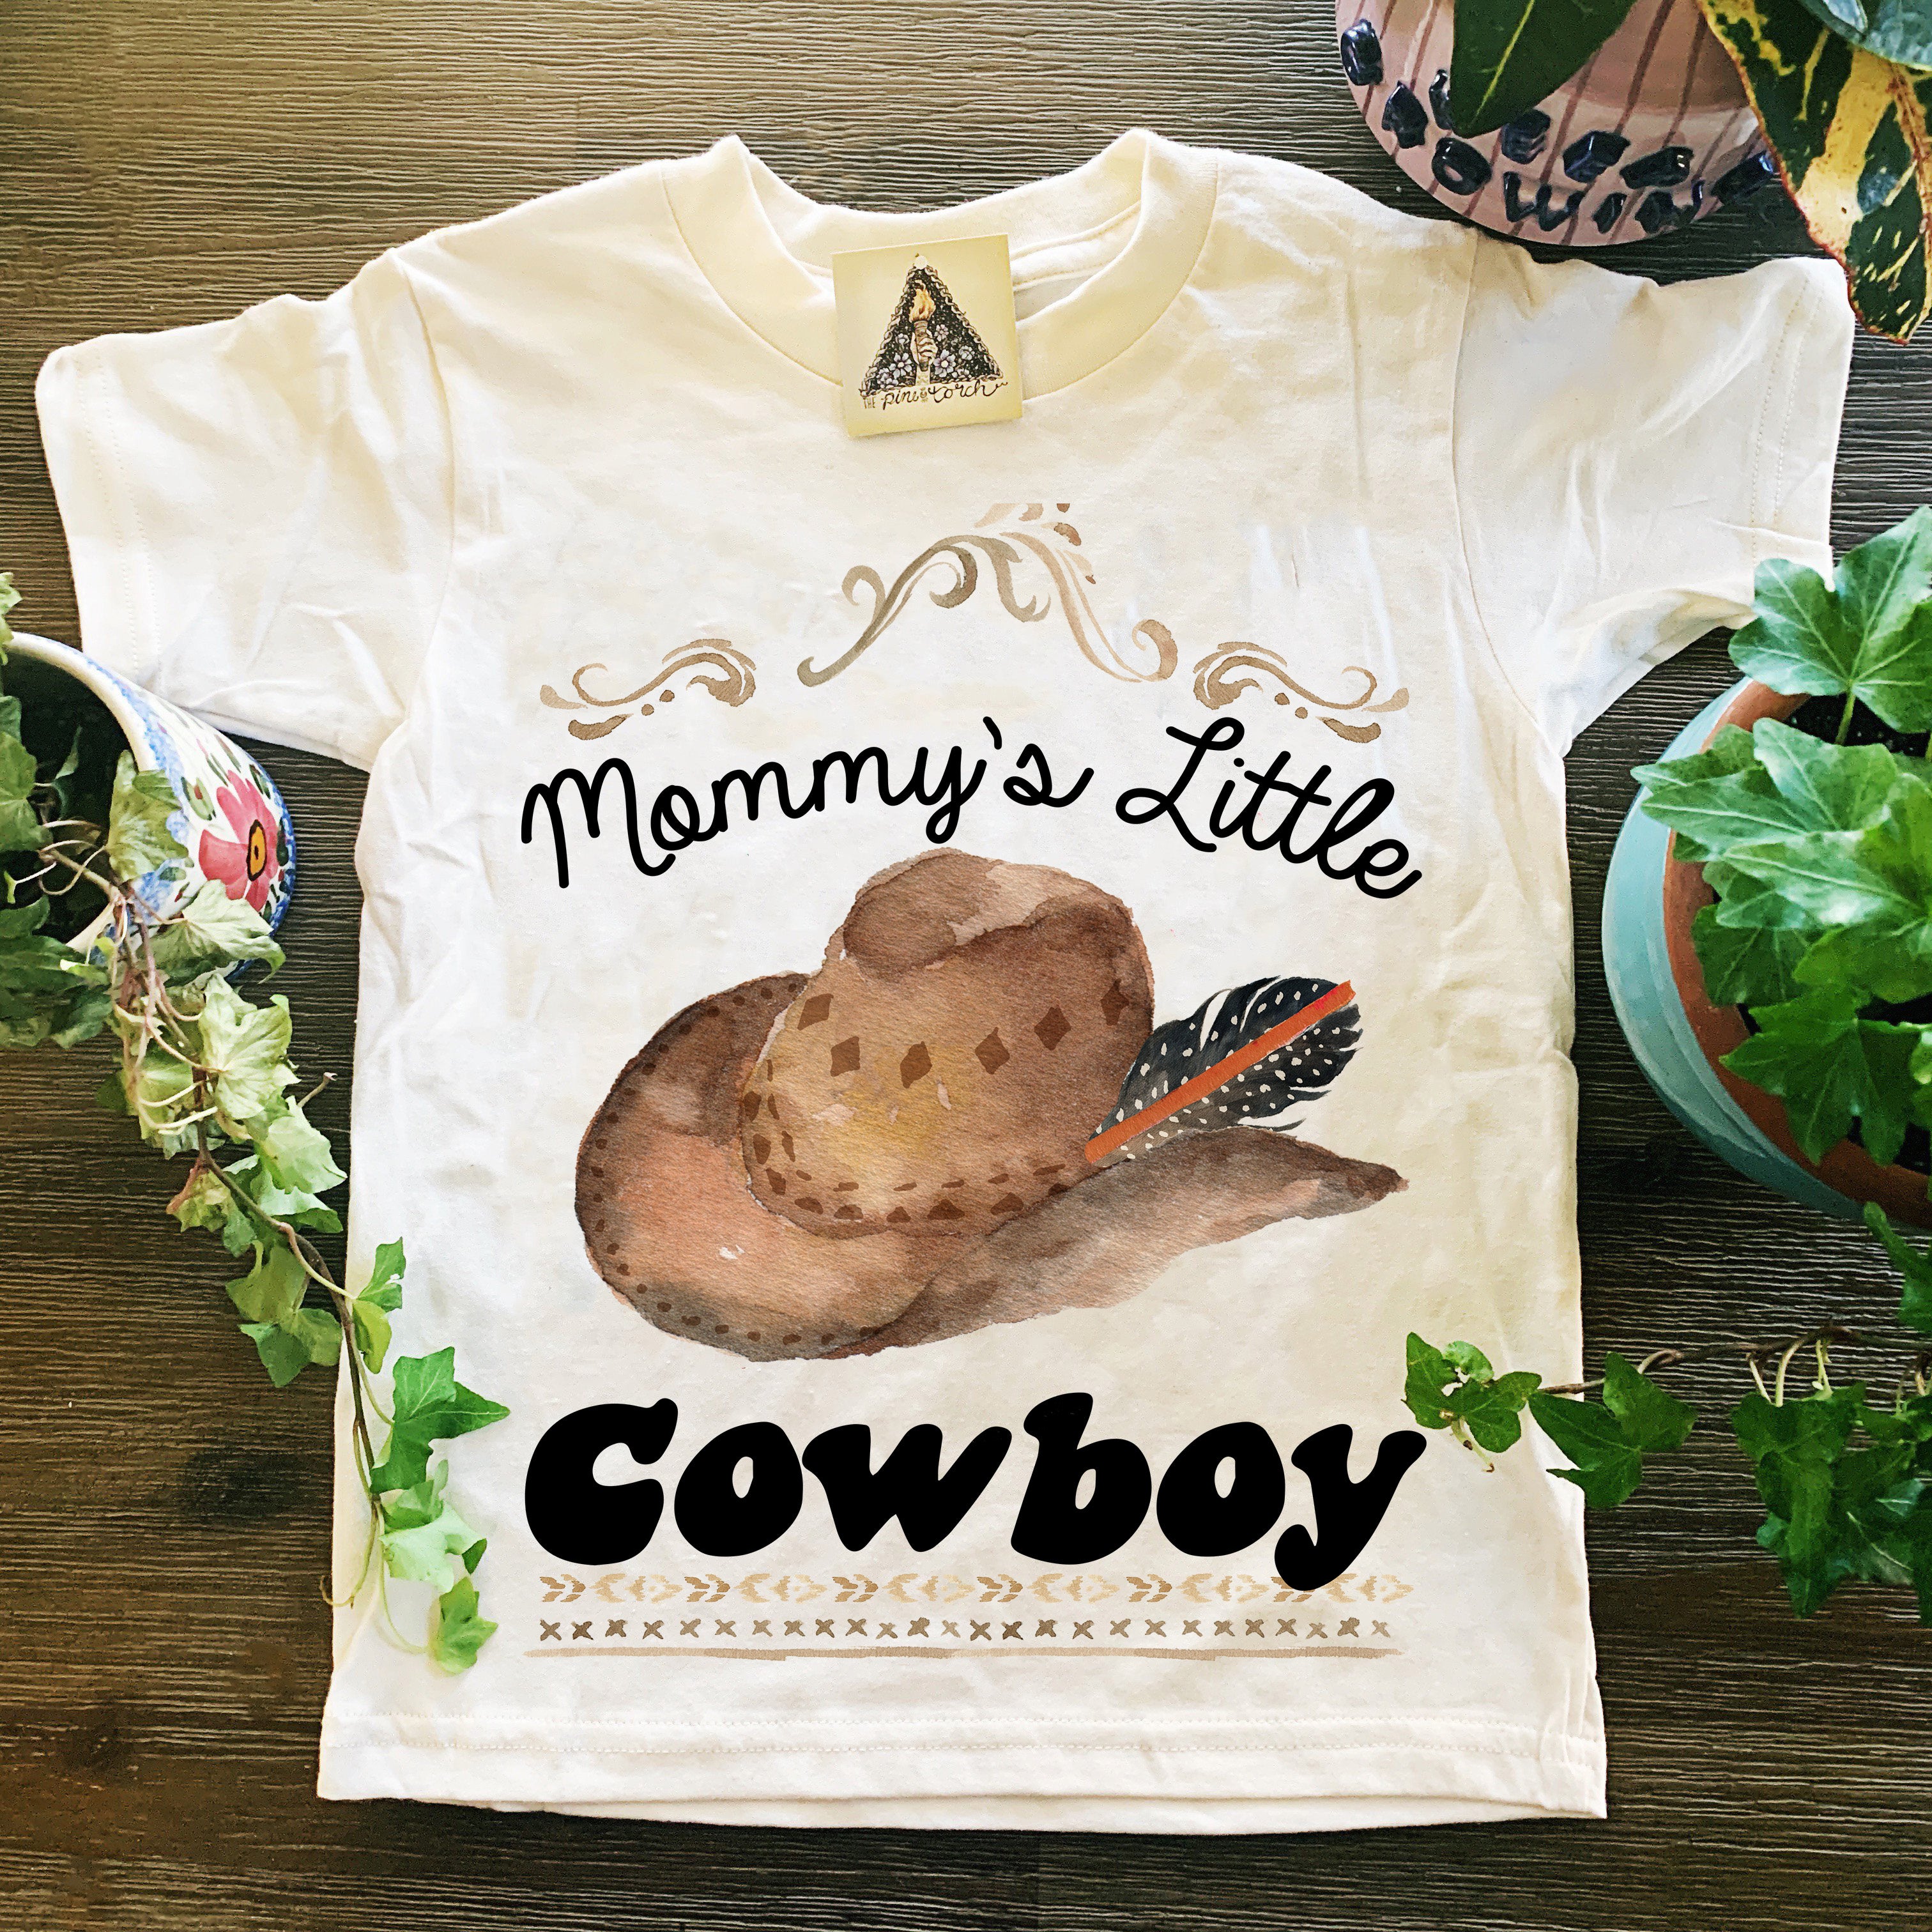 « DADDY'S LITTLE COWGIRL » KID'S TEE